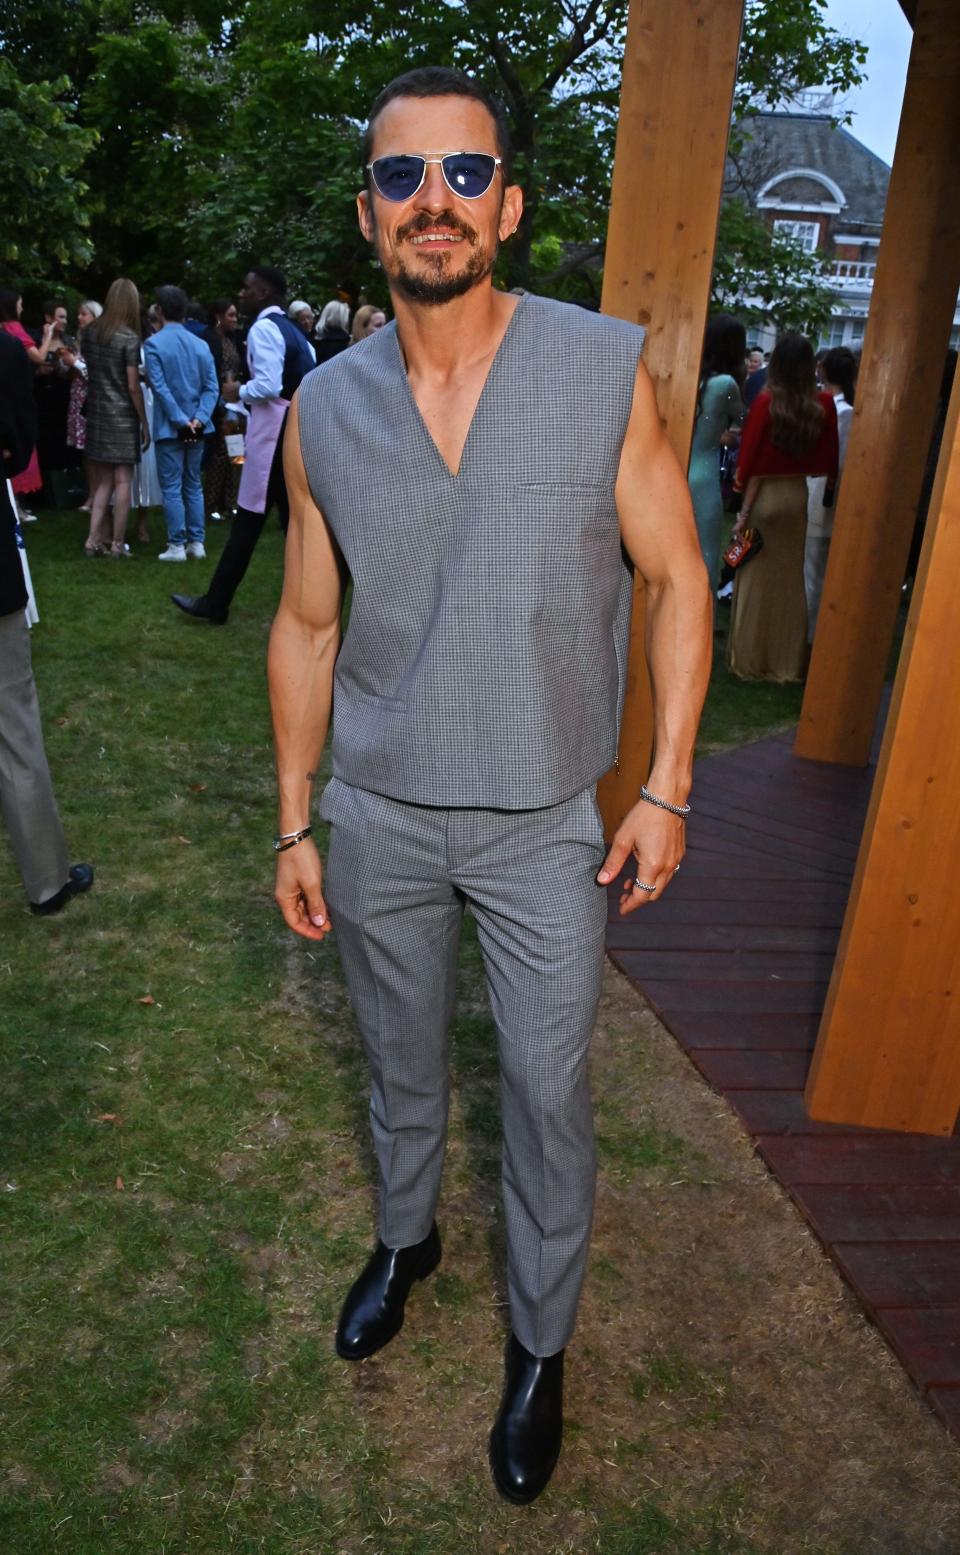 Orlando Bloom attends the Serpentine Summer Party 2023 on June 27, 2023 in London, England.